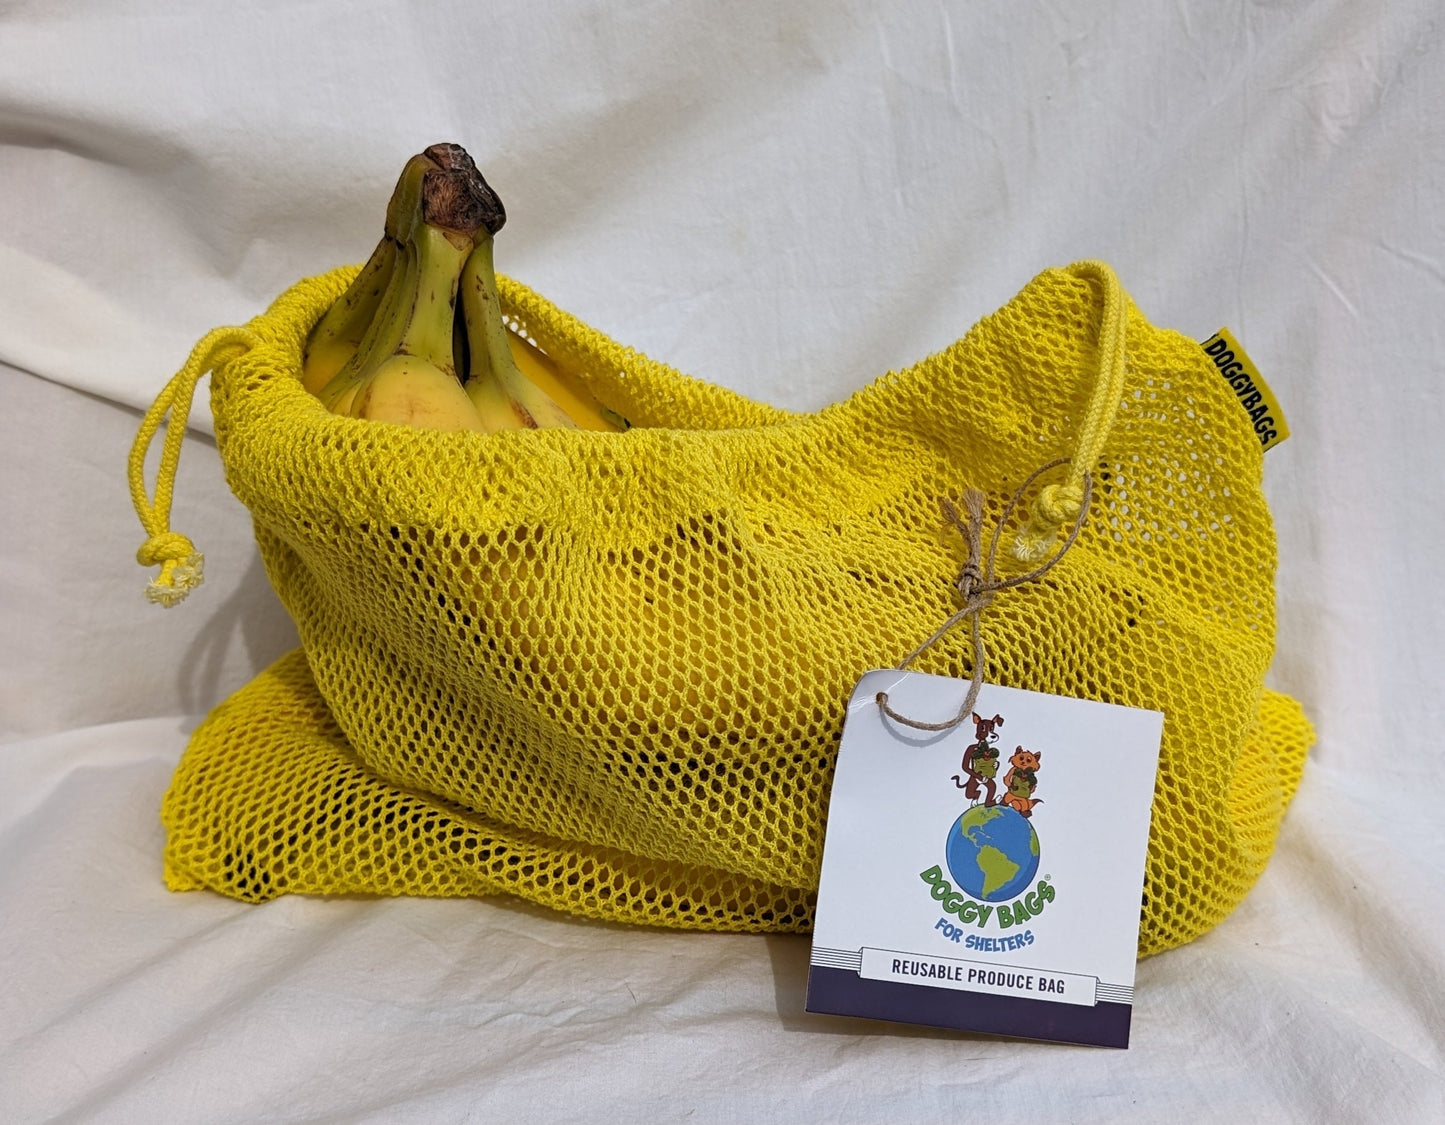 Produce Bags - Colors  - S/M/L - Blue/Yellow/Green